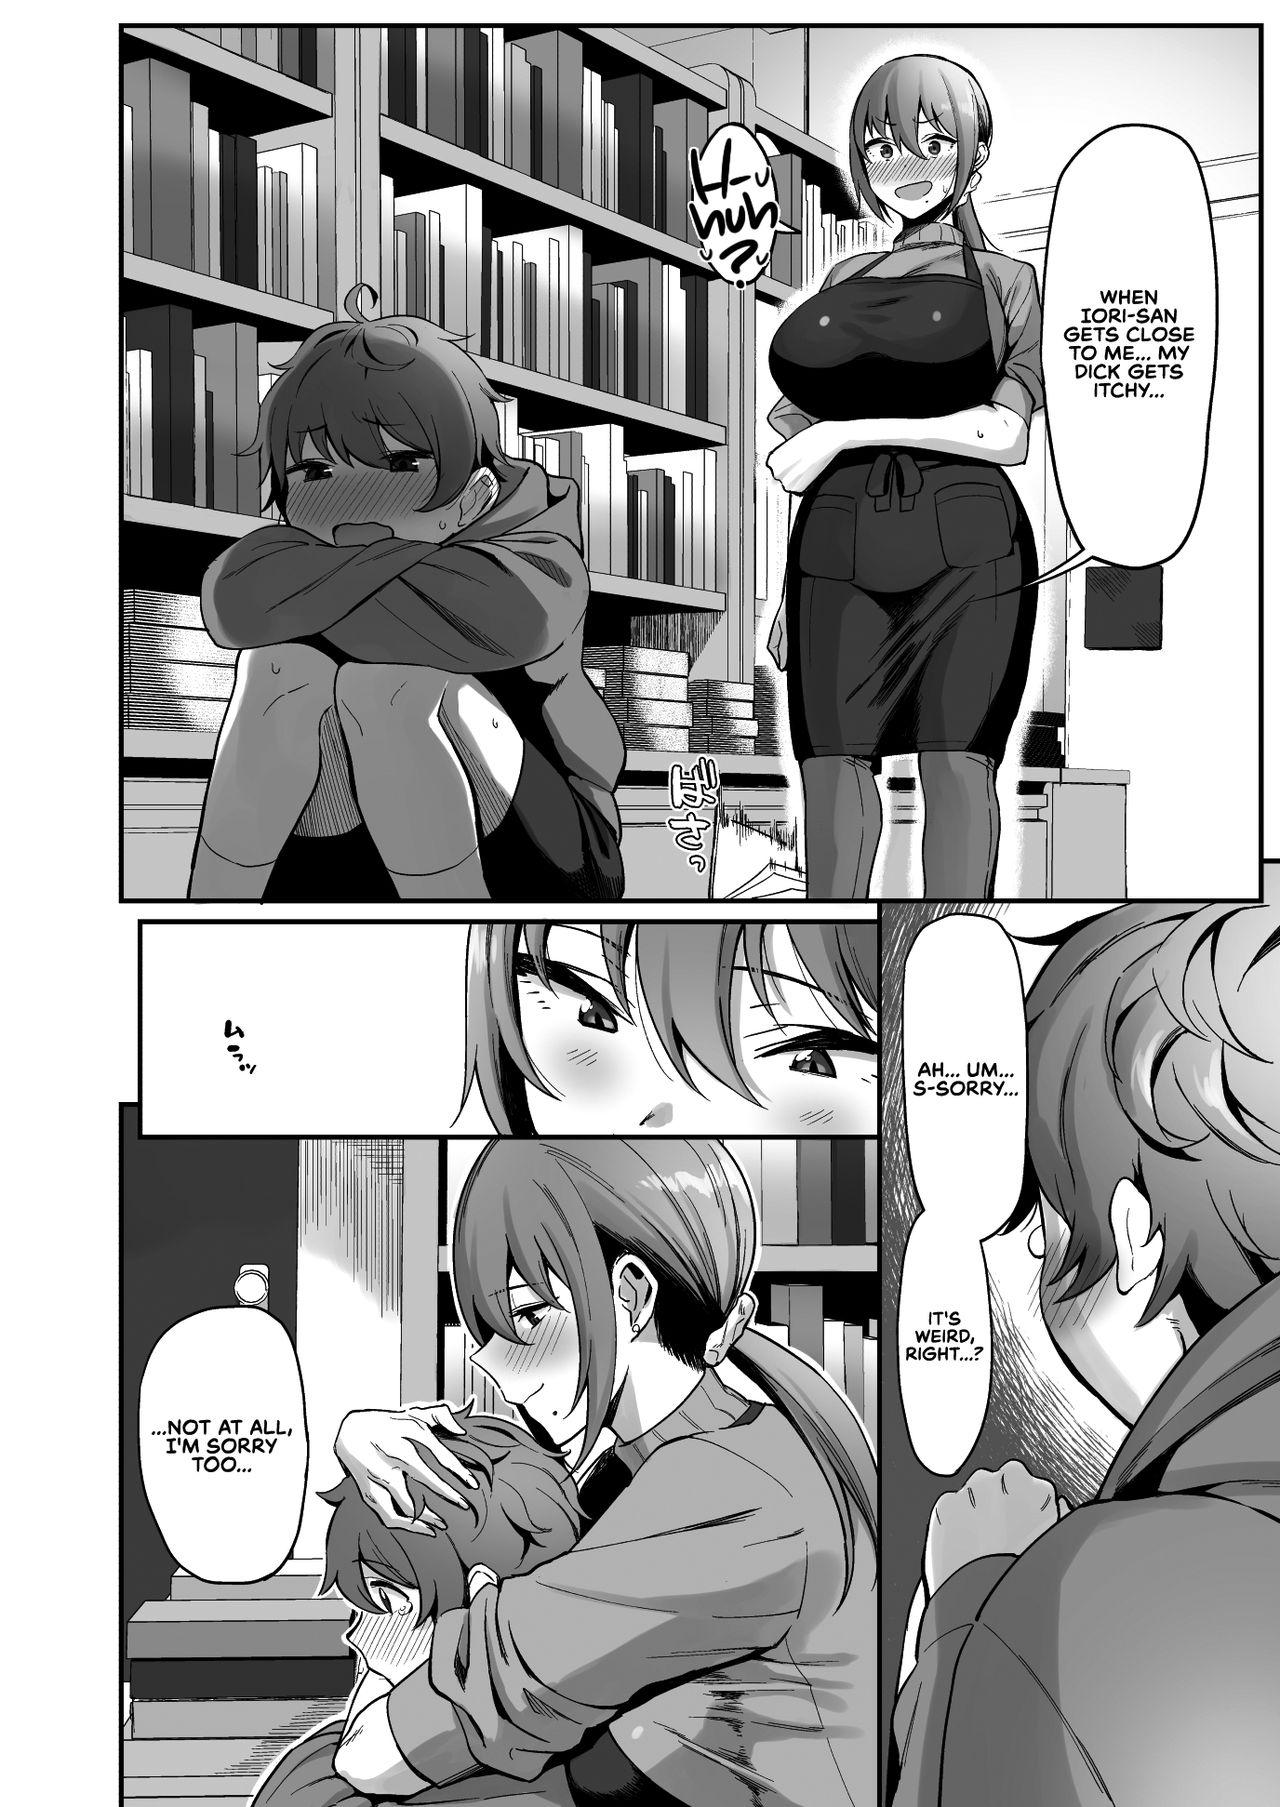 Price Furuhonya no Onee-san to | With The Lady From The Used Book Shop - Original Beard - Page 9